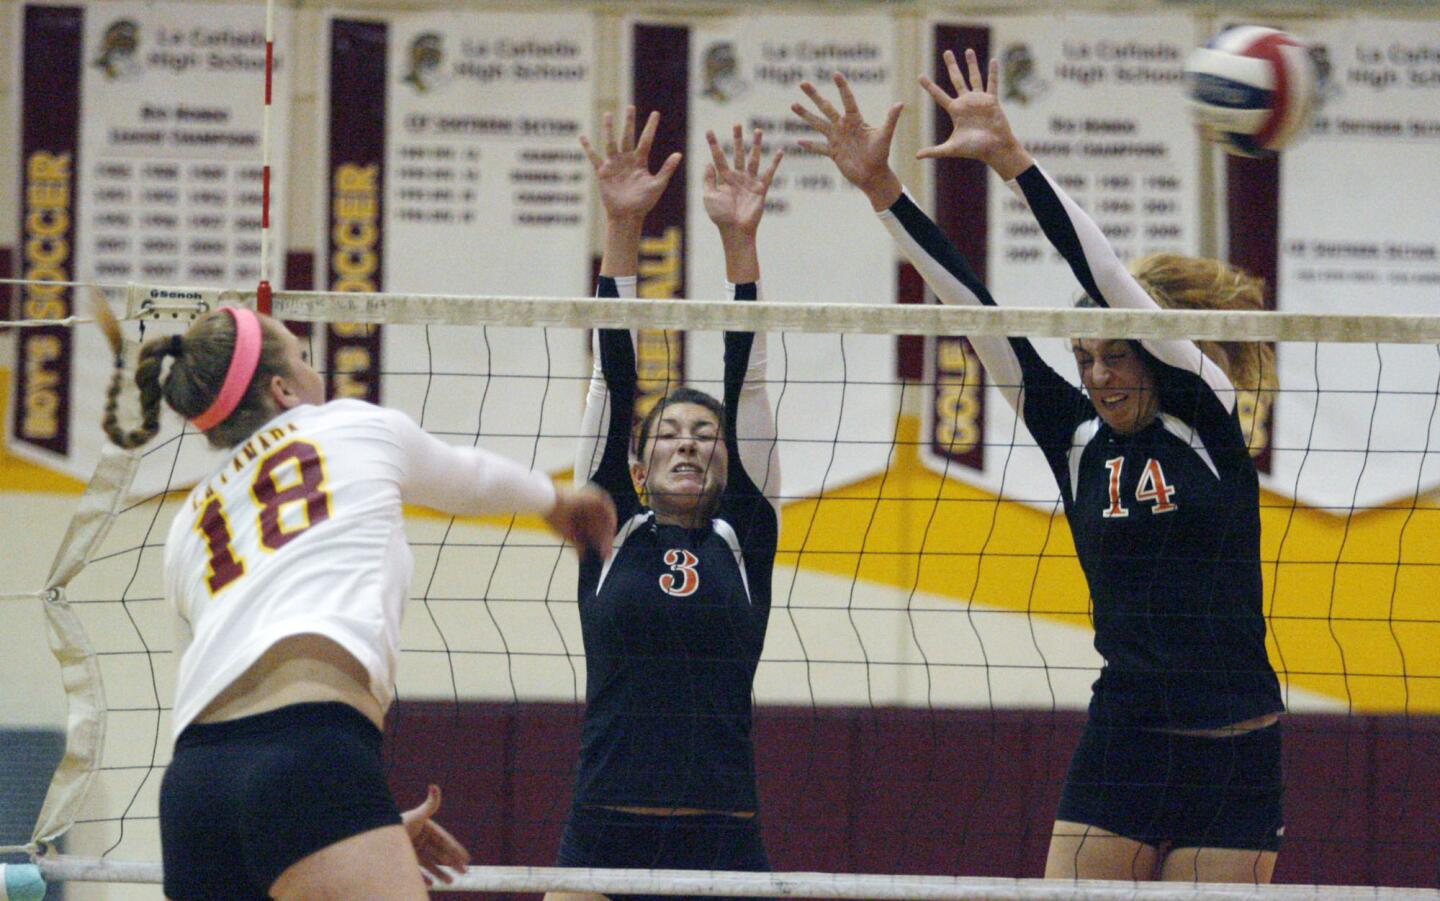 La Canada's Micaela Anderson, from left, spikes the ball as South Pasadena's Jessica Arroyo and Claire Kieffer-Wright attempt to block the spike during a game at La Canada High School on Tuesday, October 16, 2012.